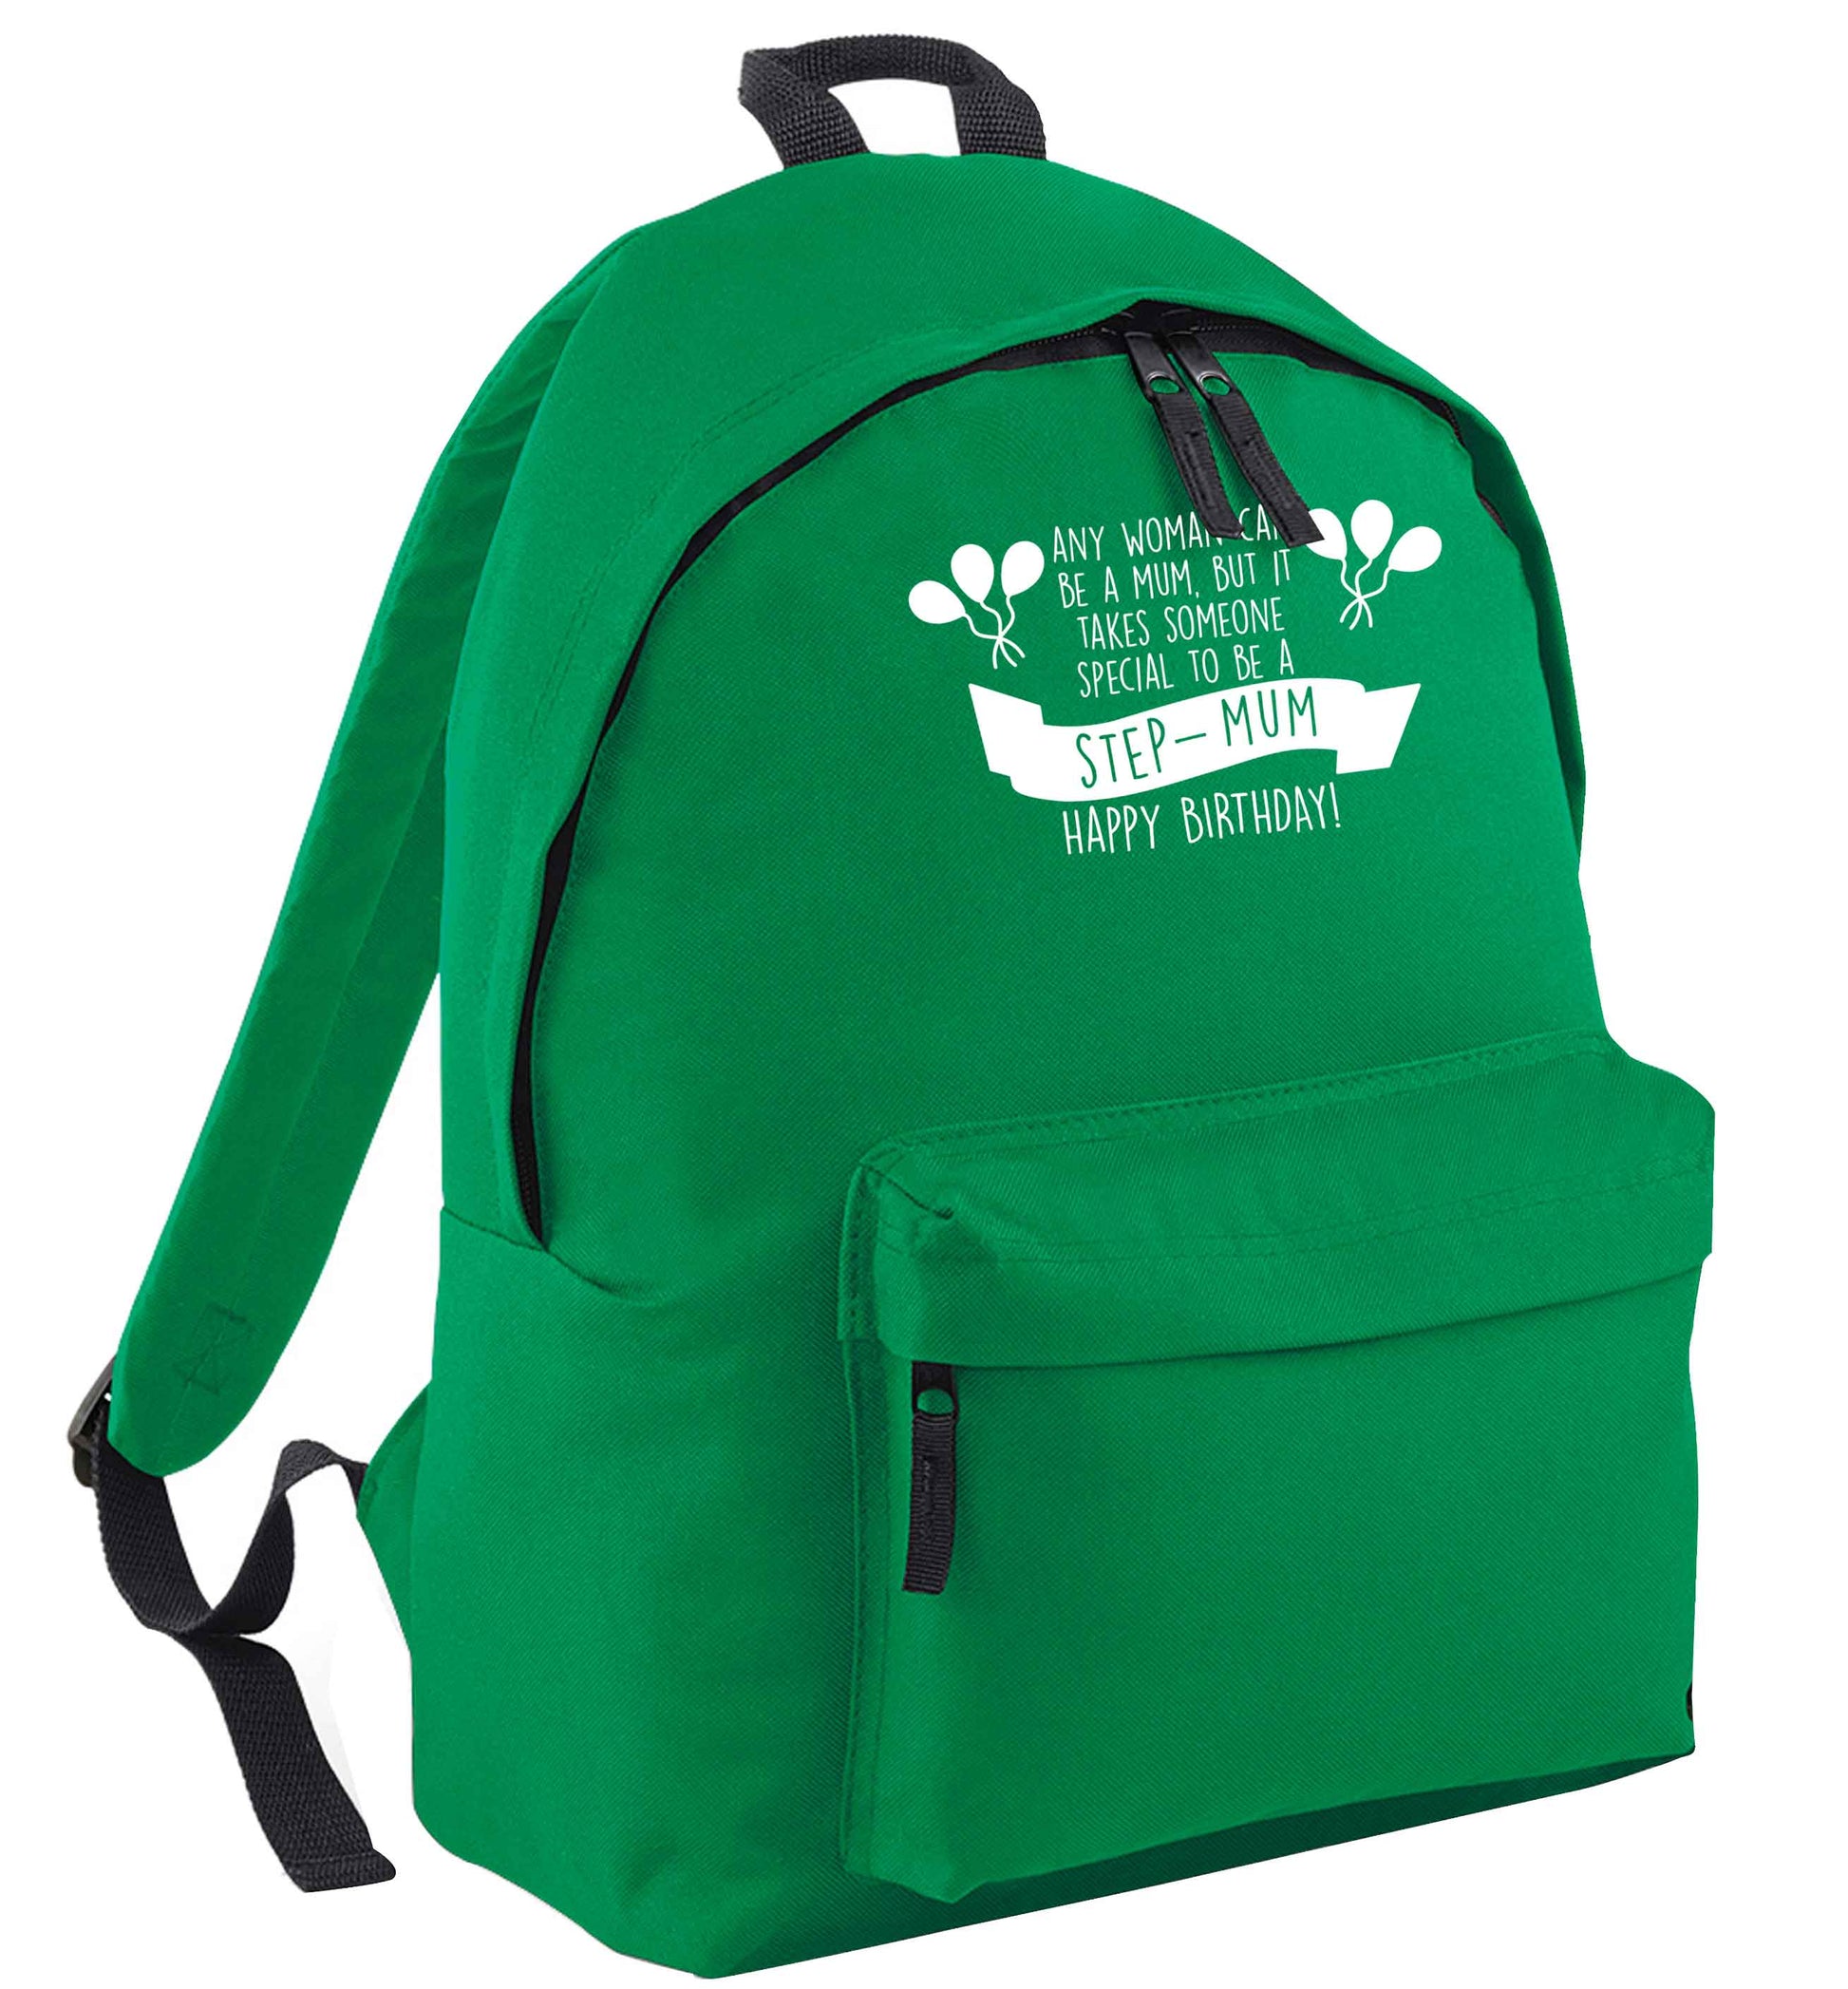 Takes someone special to be a step-mum, happy birthday! green adults backpack